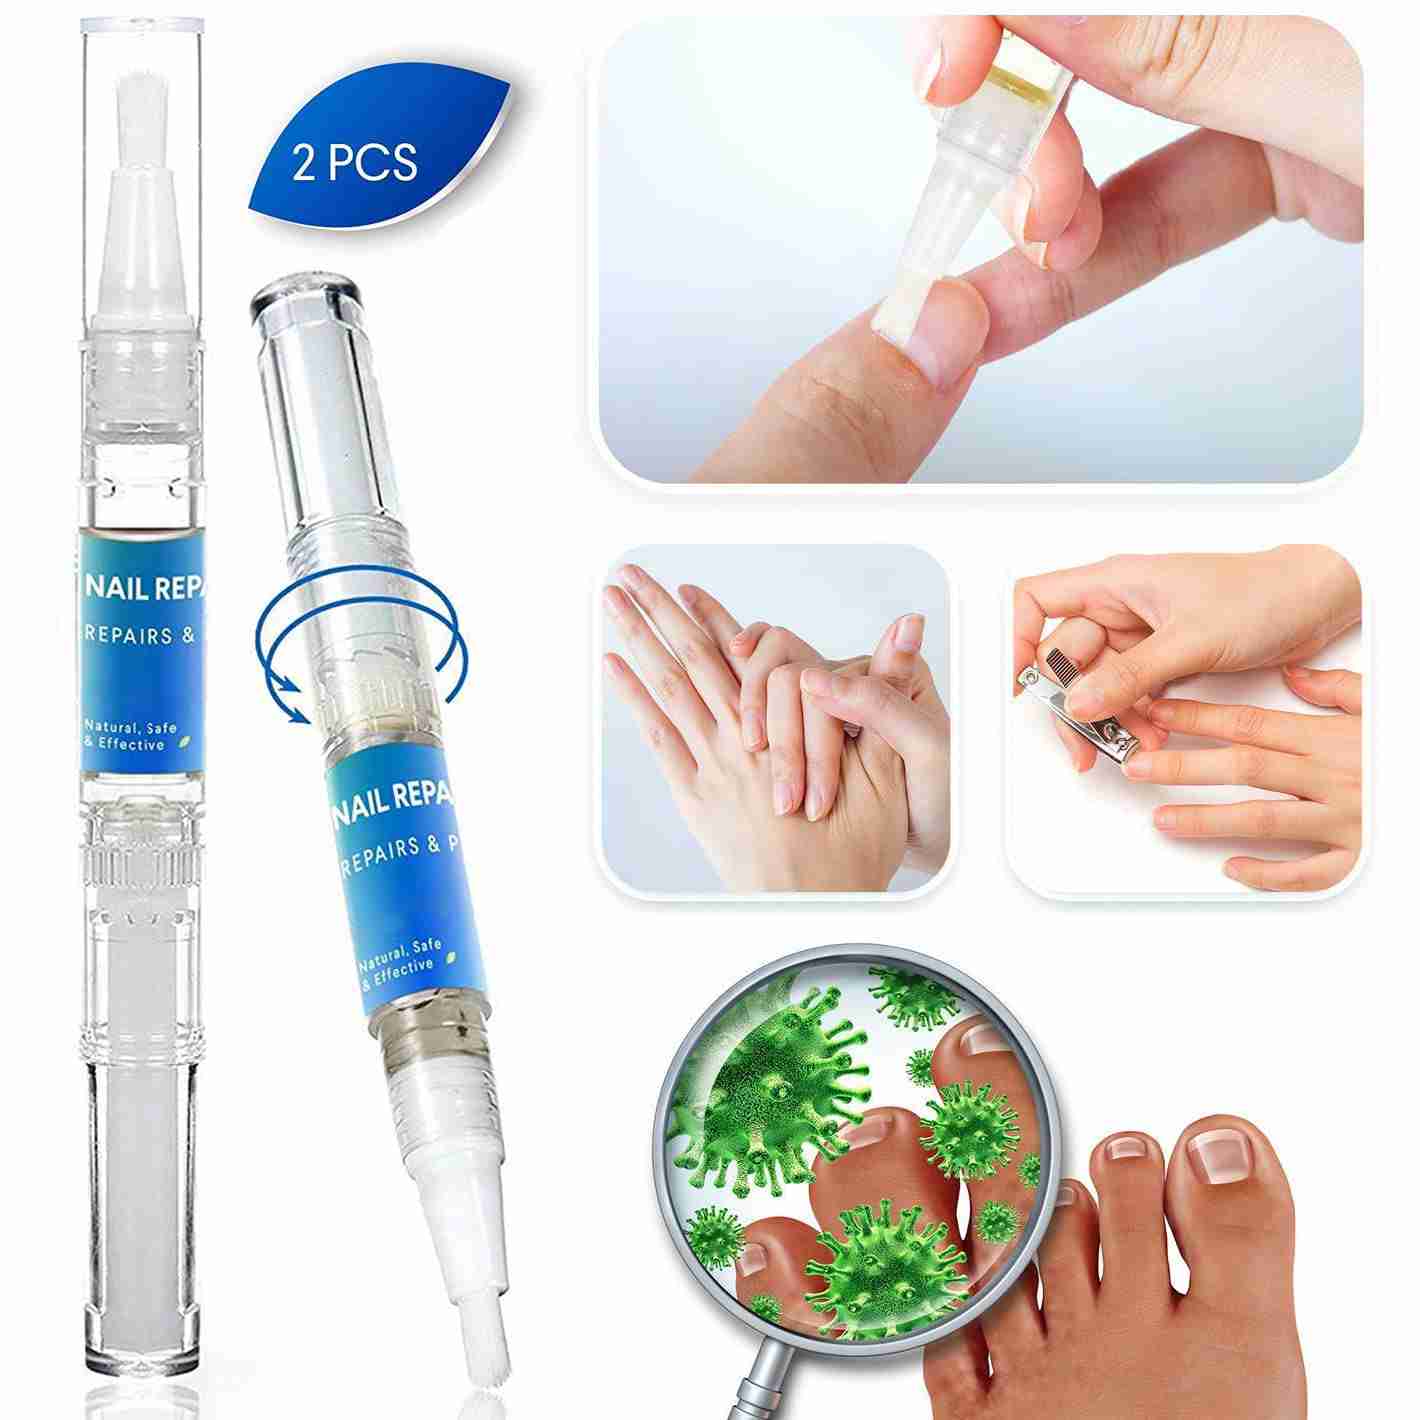 nail-fungus-treatment-for-fingernails with discount code